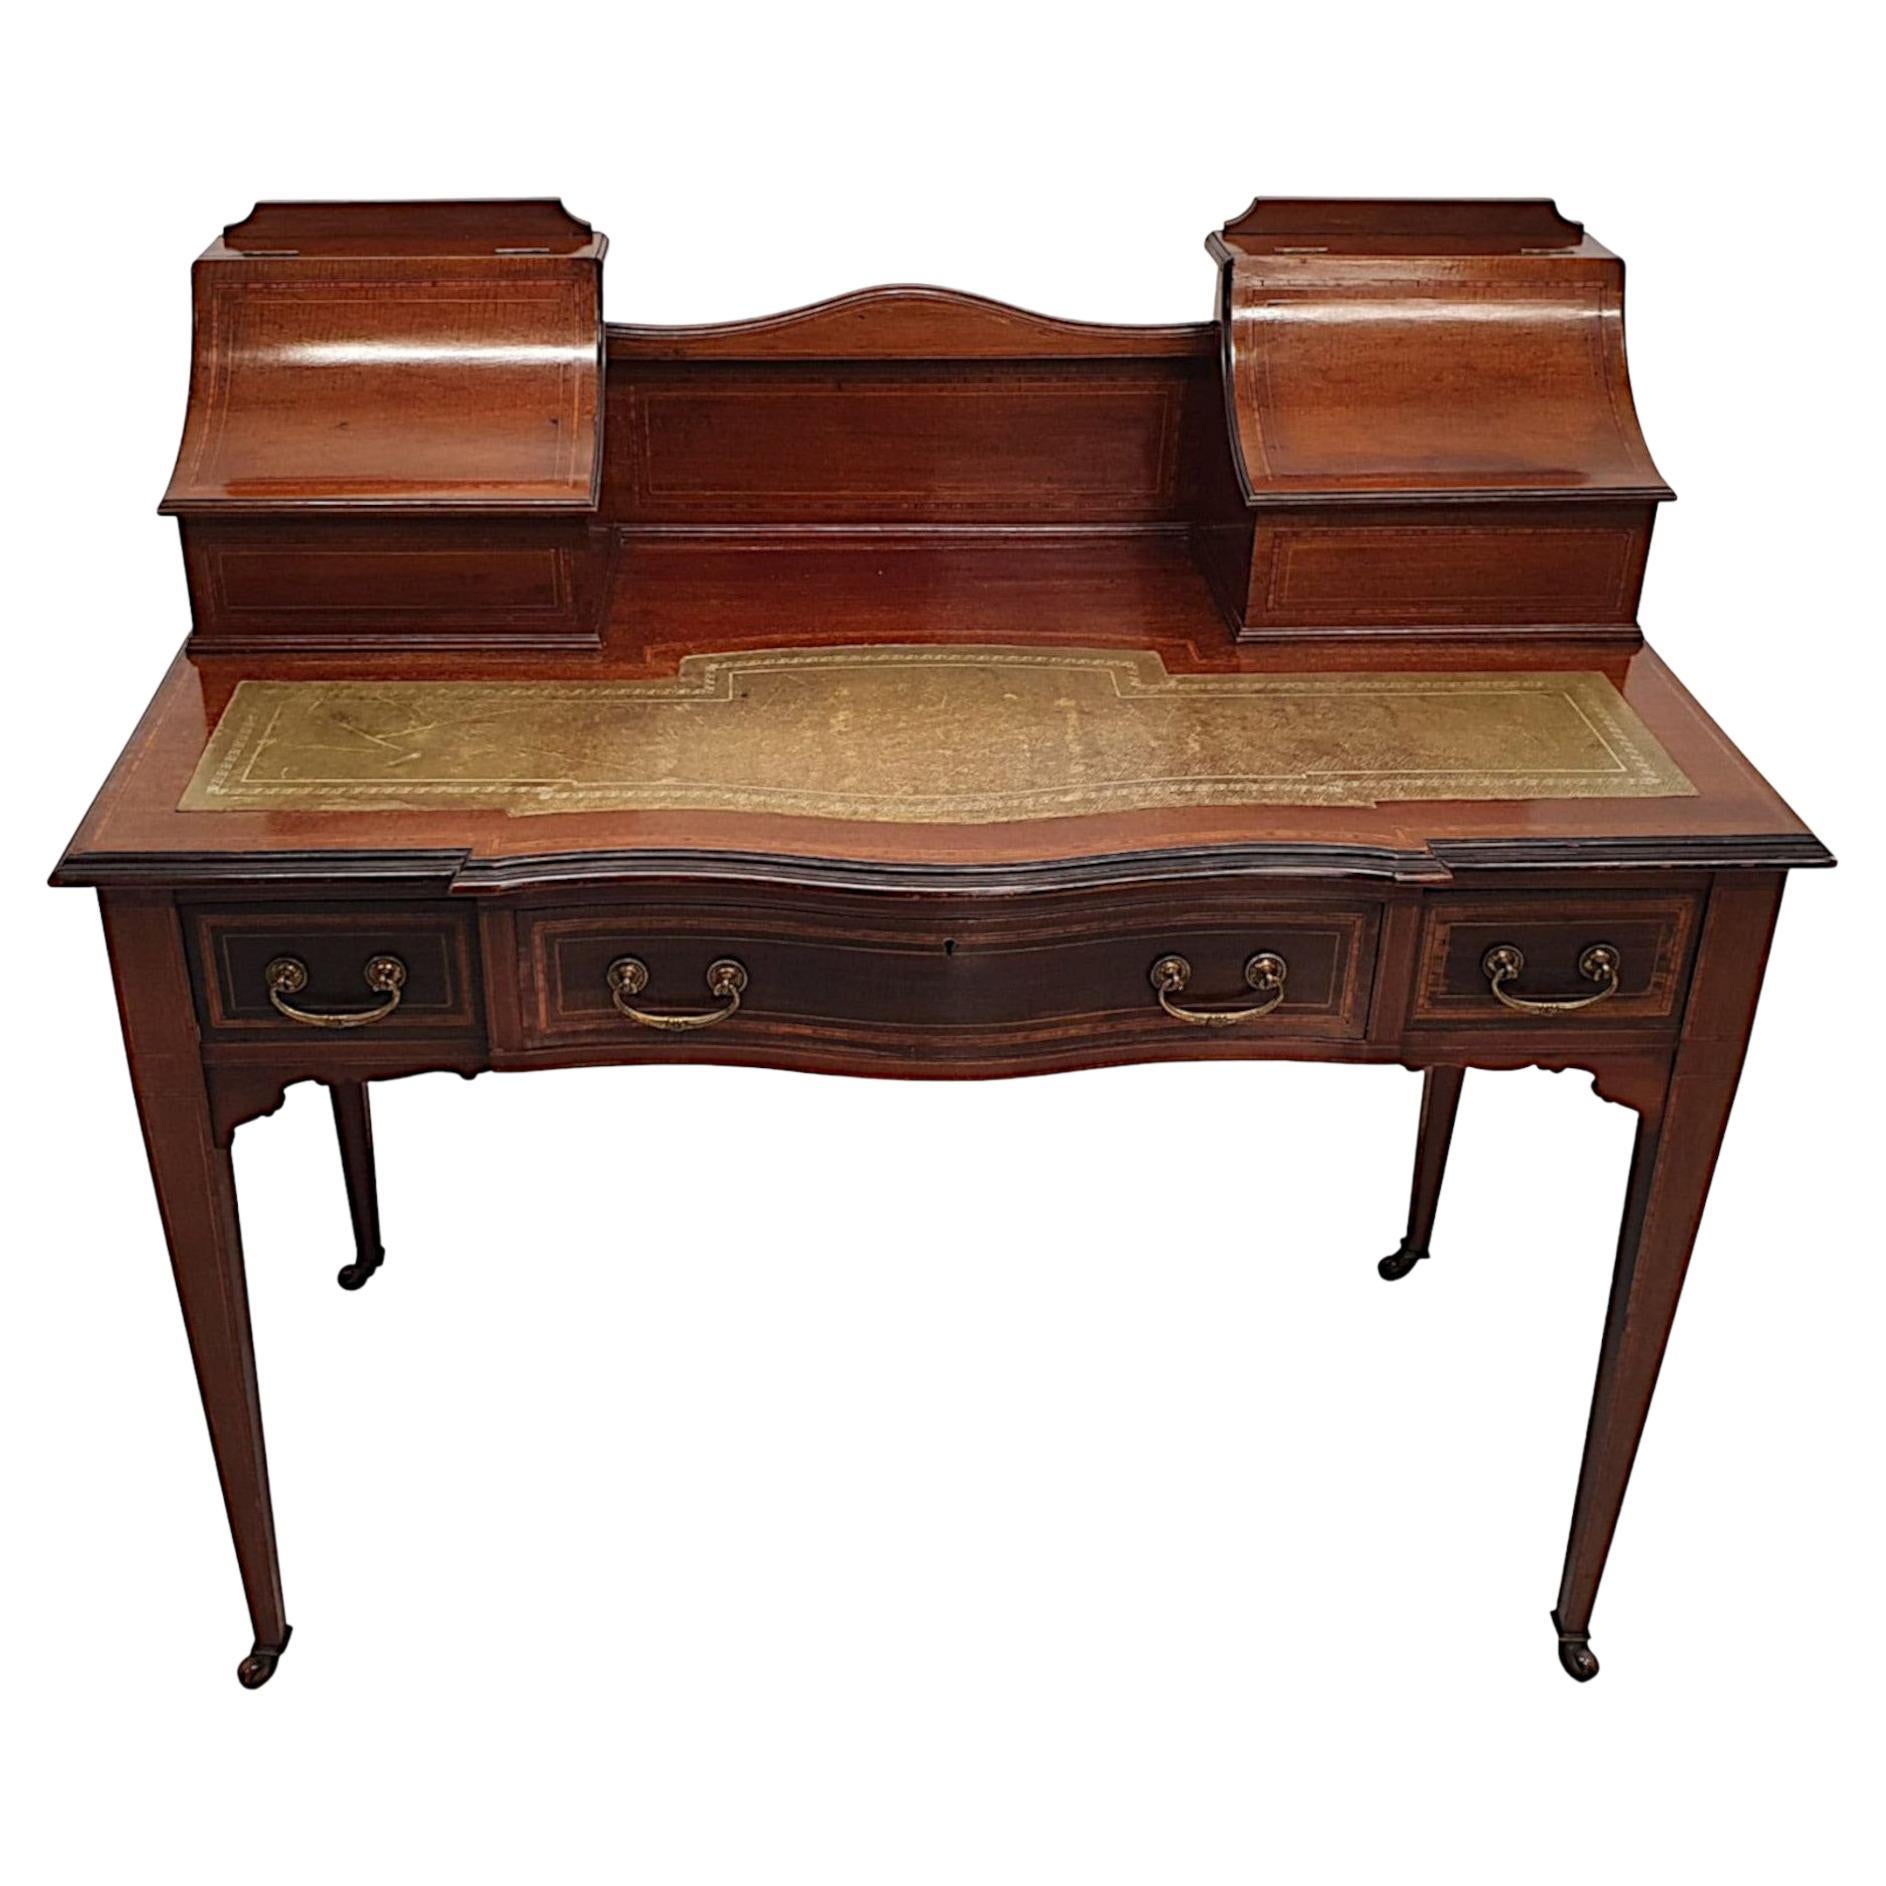 Fabulous Edwardian Inlaid Desk in the Carlton House Style For Sale